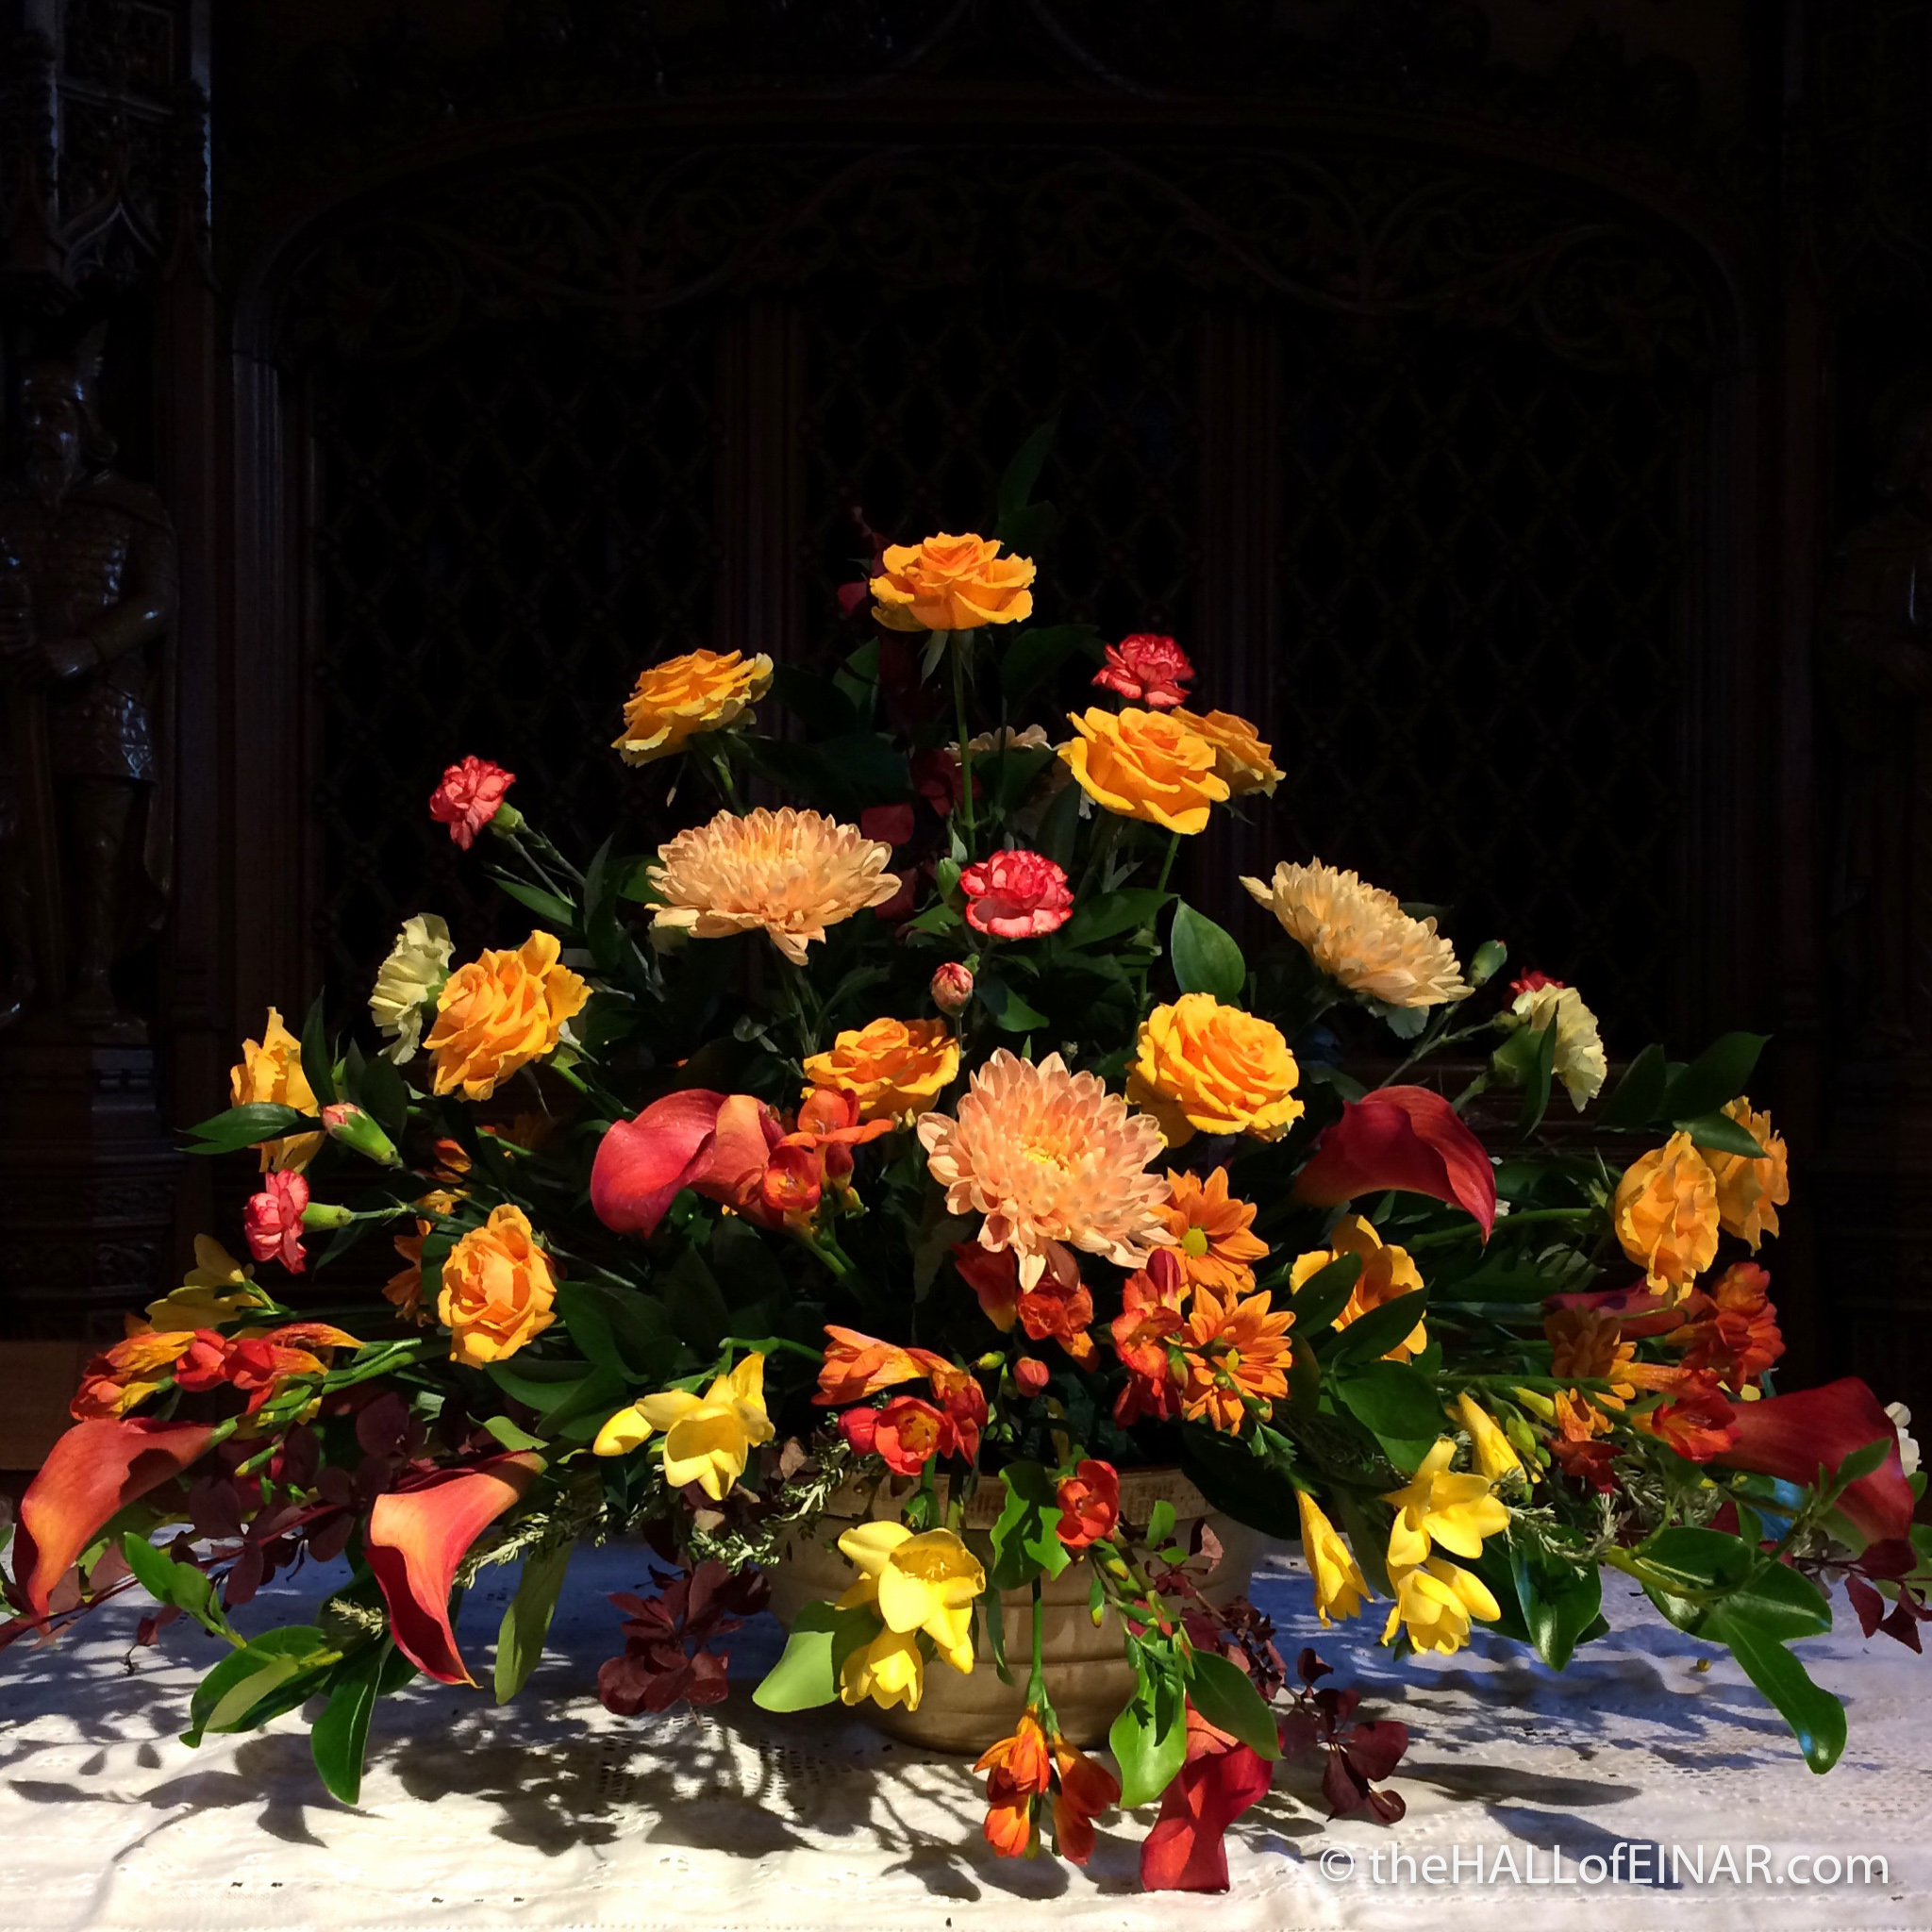 Flower Display - St Magnus Cathedral - The Hall of Einar - photograph (c) 2016 David Bailey (not the)